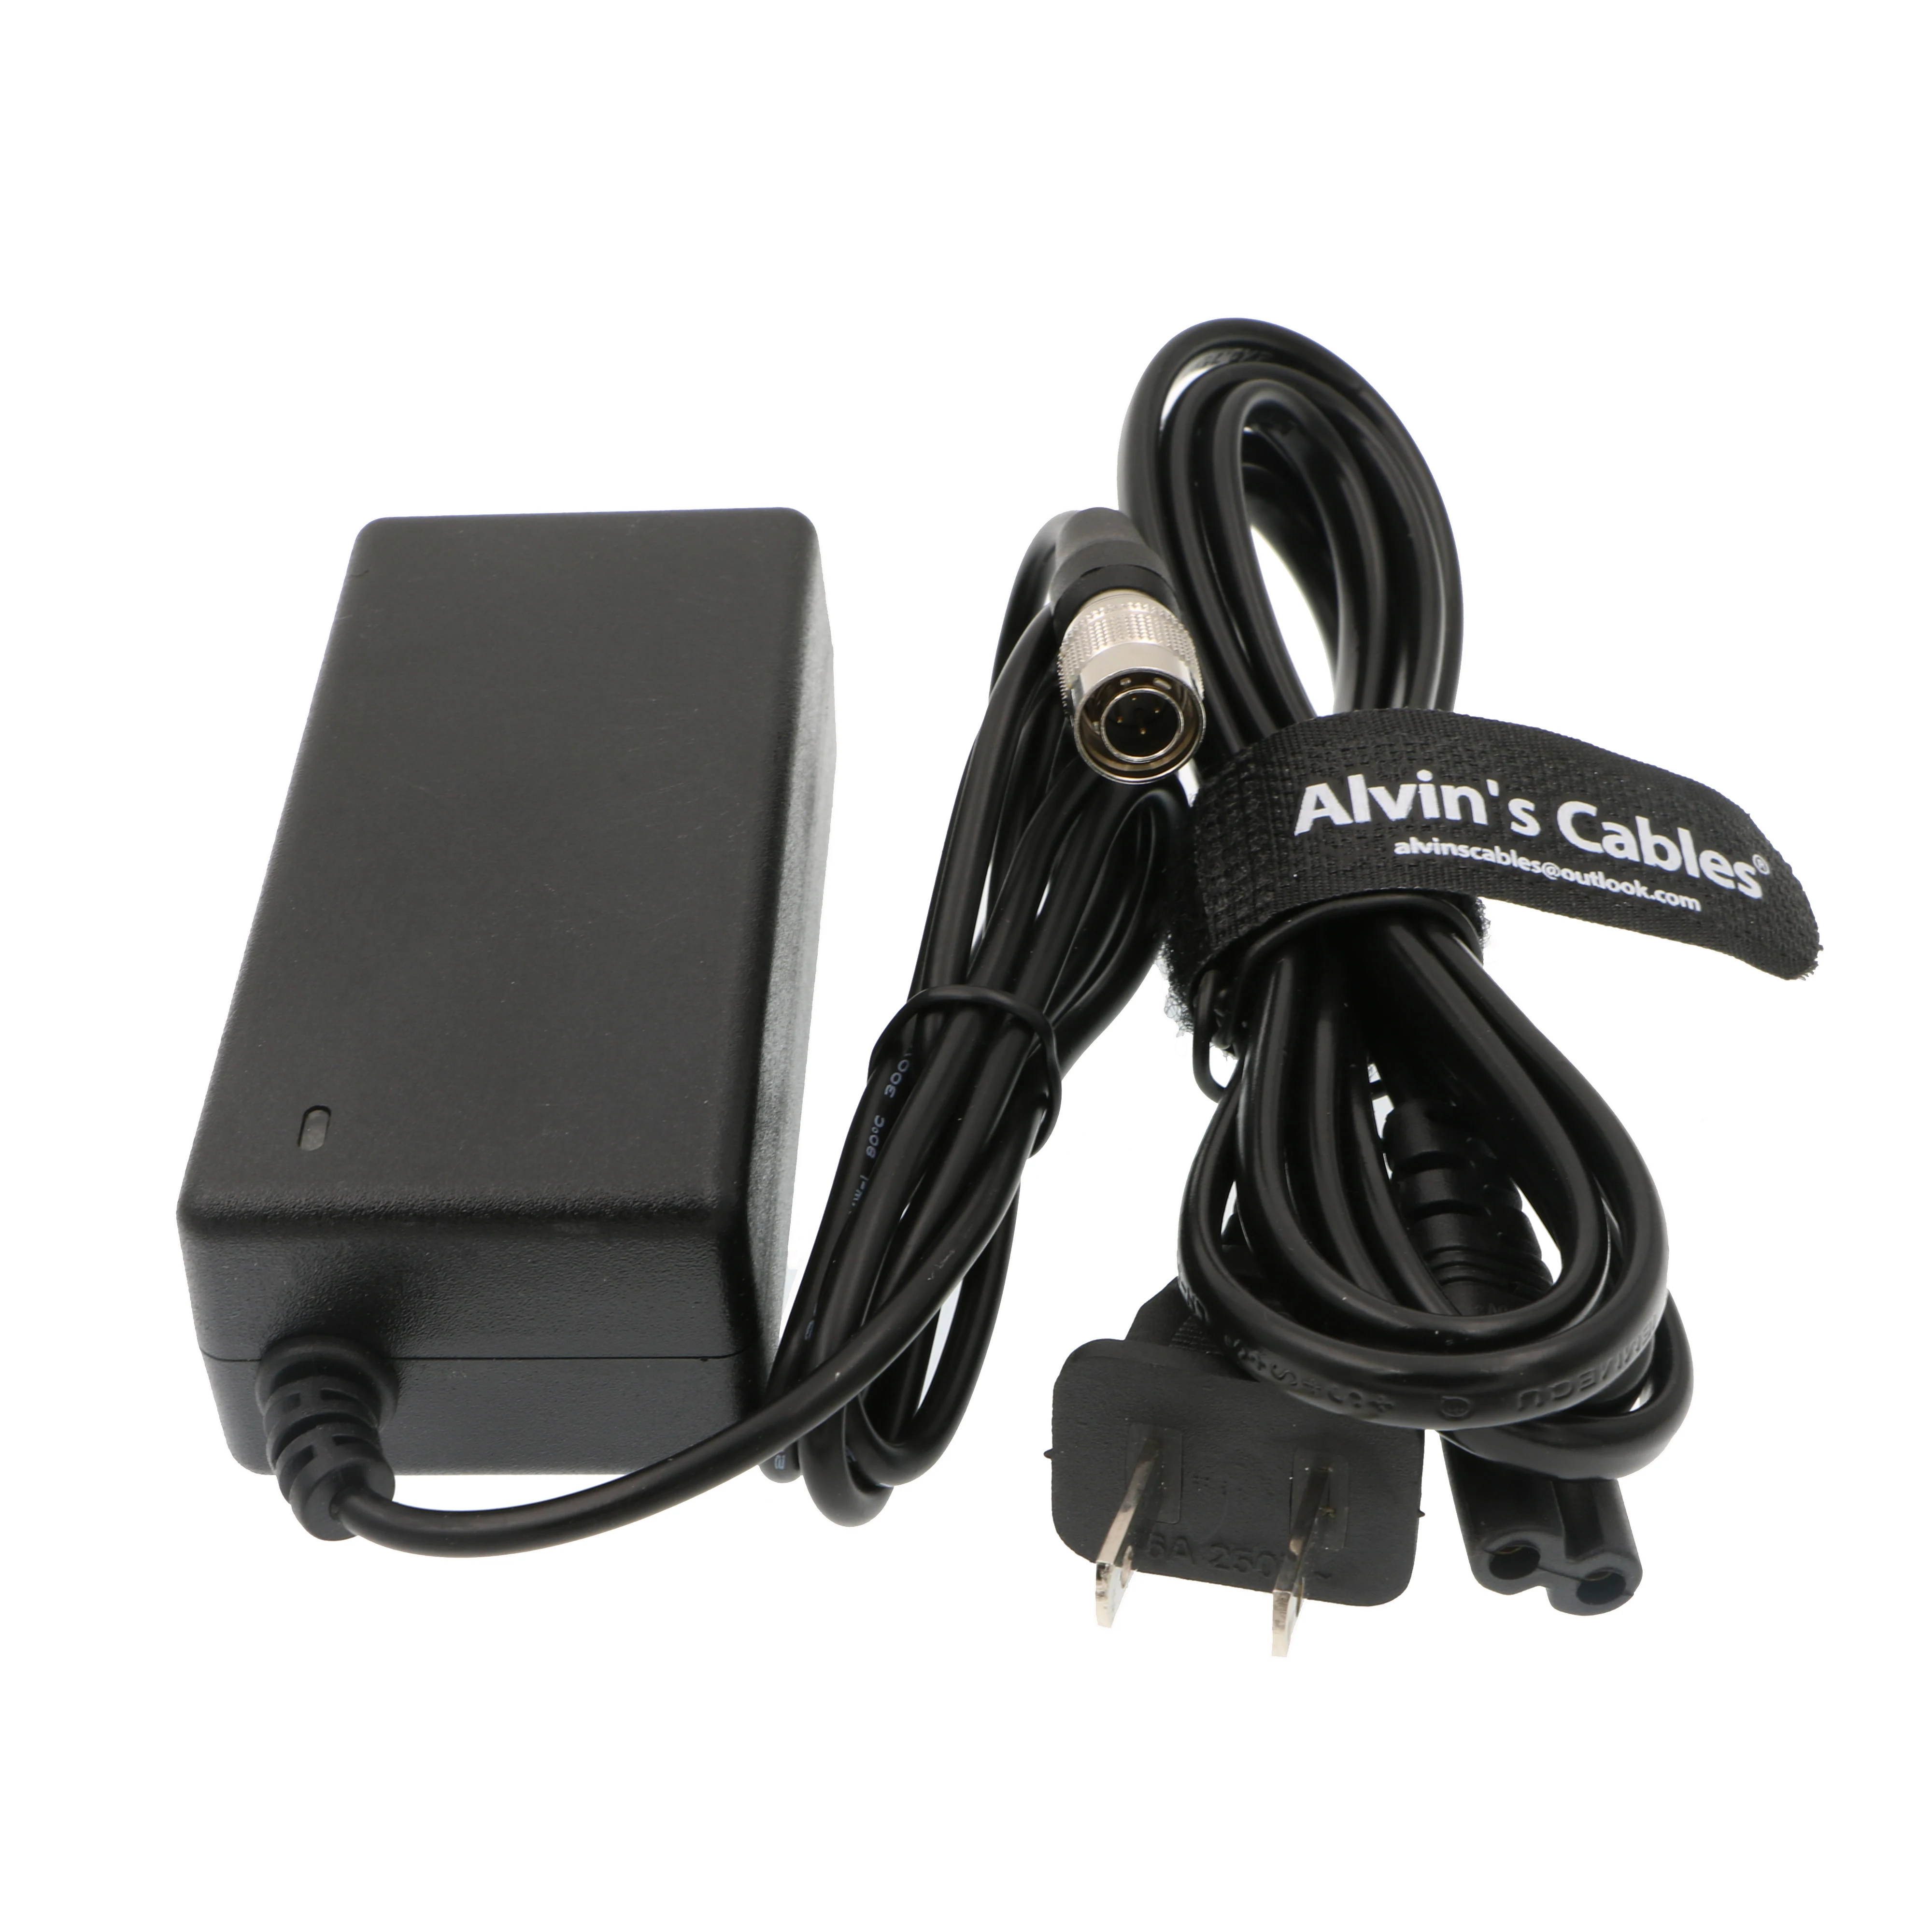 Alvins Cables AC to 4 Pin Hirose Male 12V 2A Power Adapter for Sound Devices ZAXCOM Sony